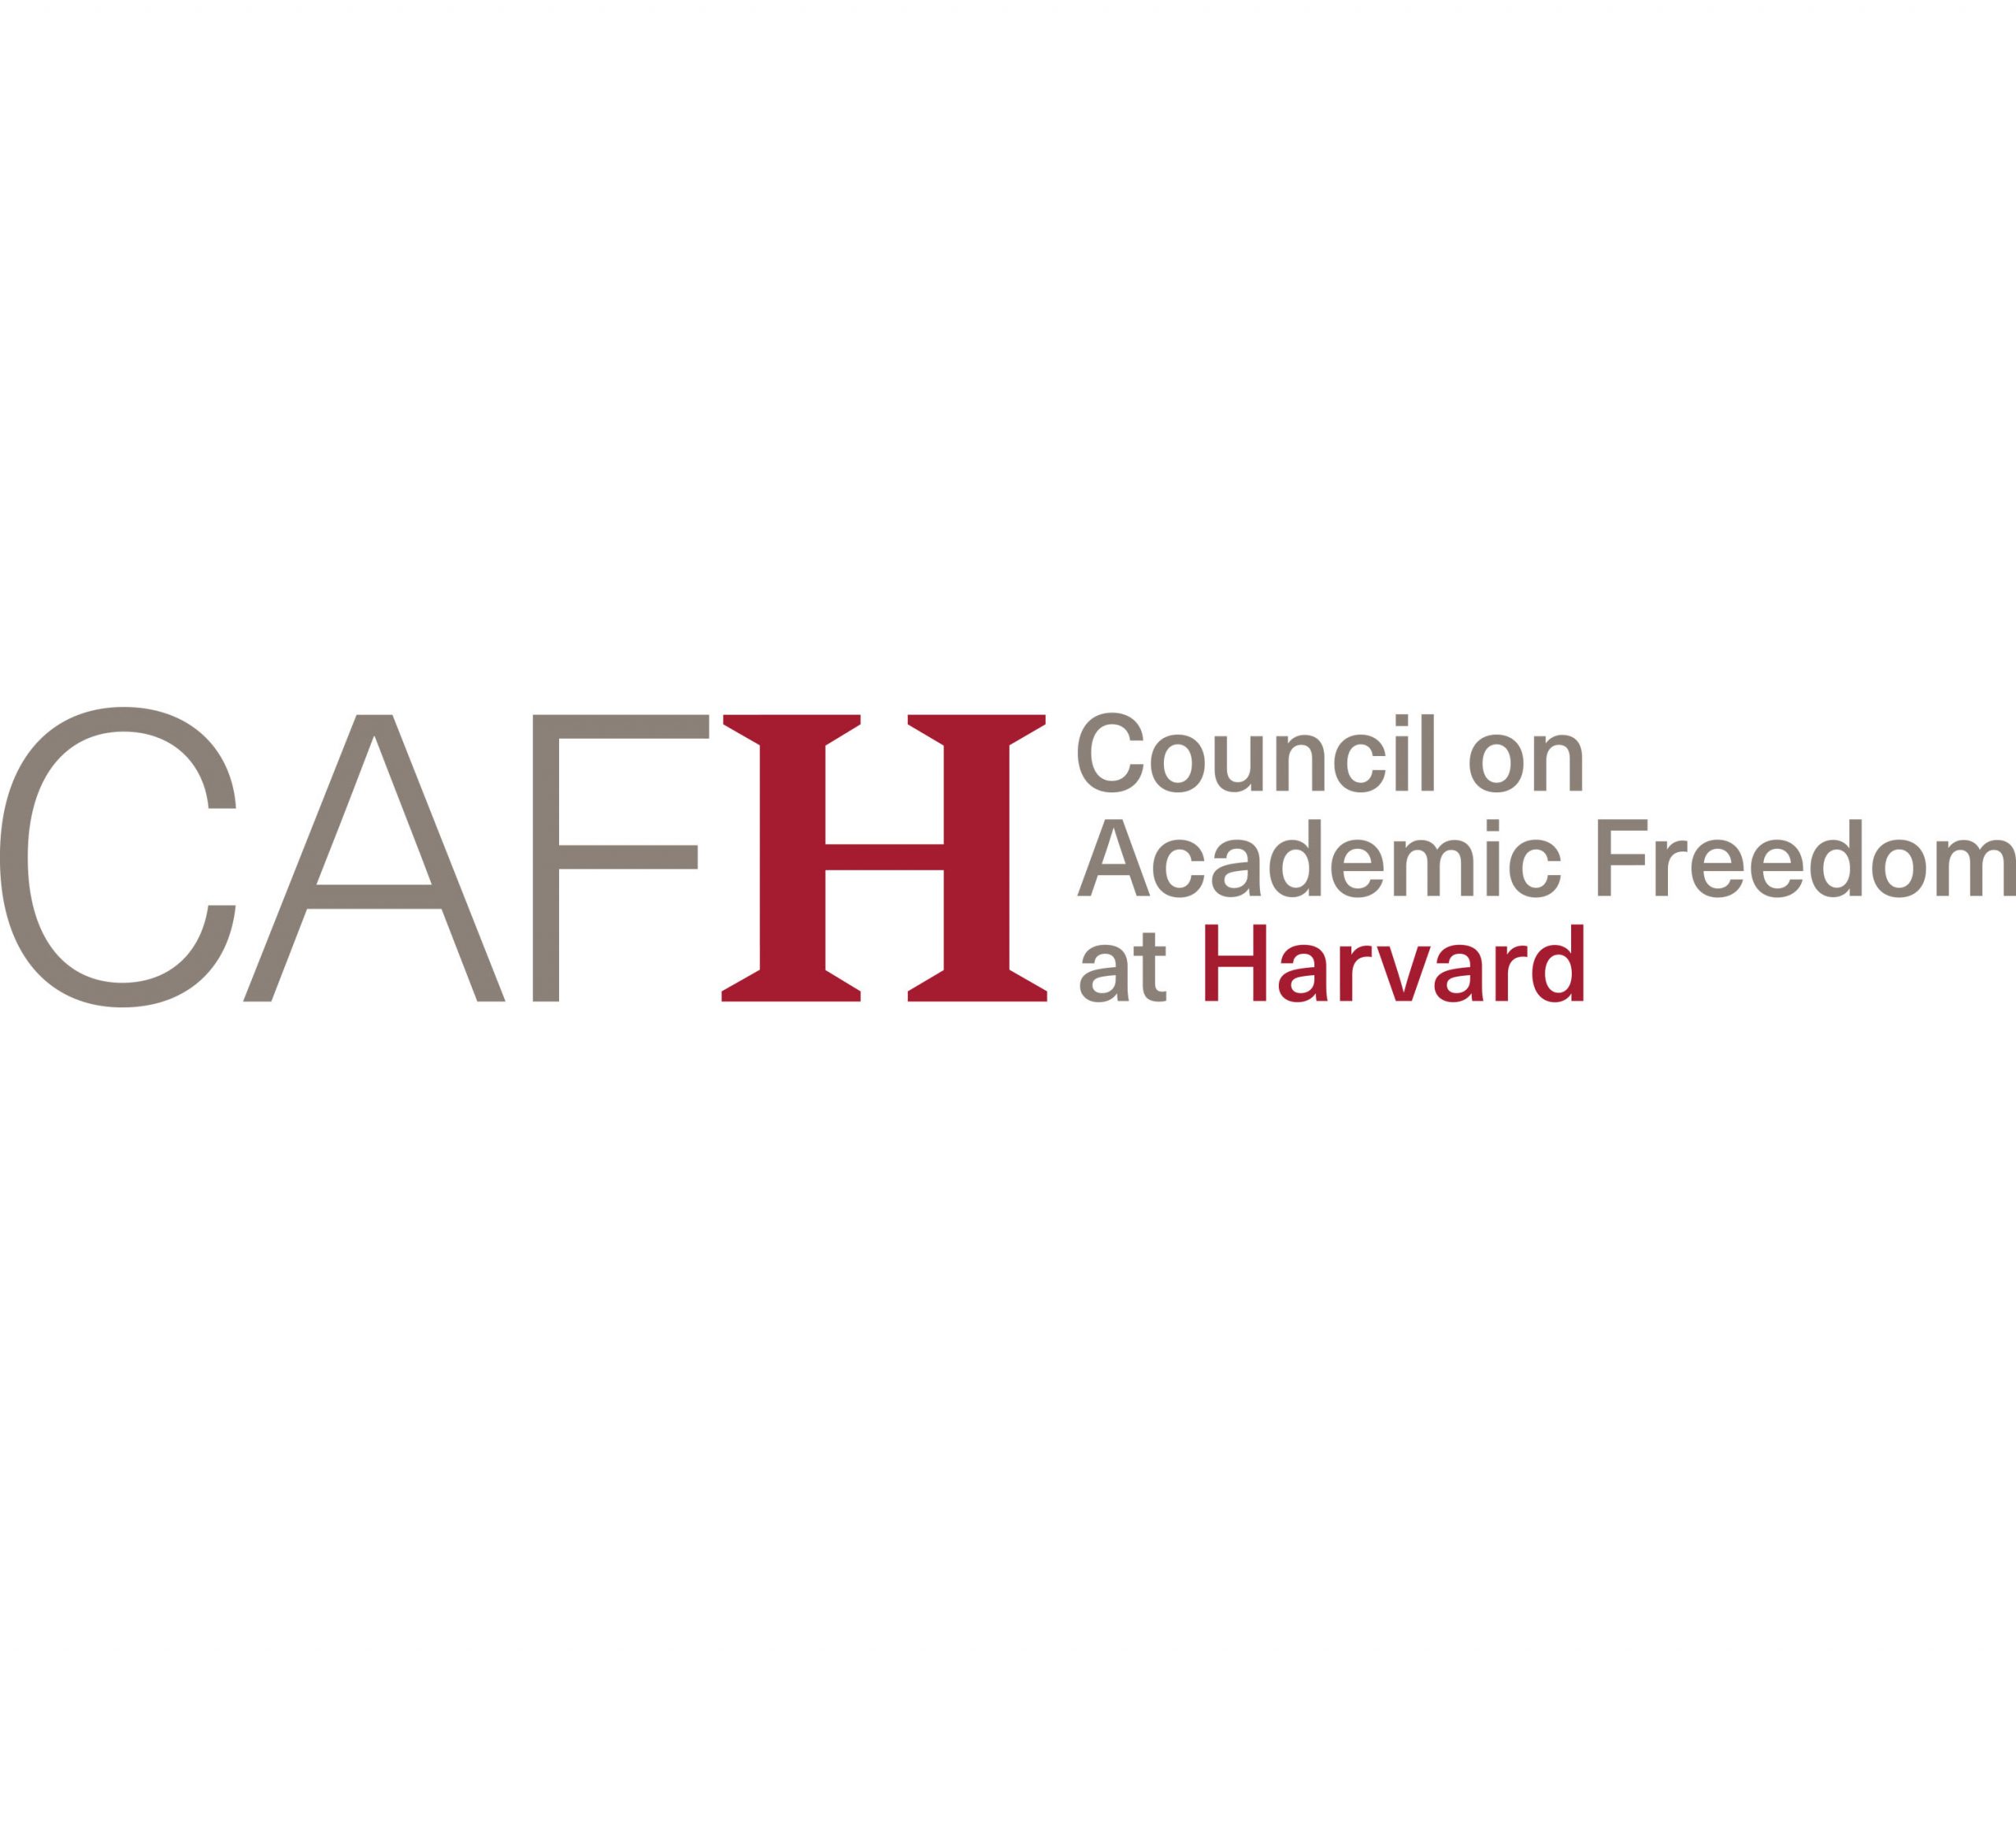 Council on Academic Freedom at Harvard